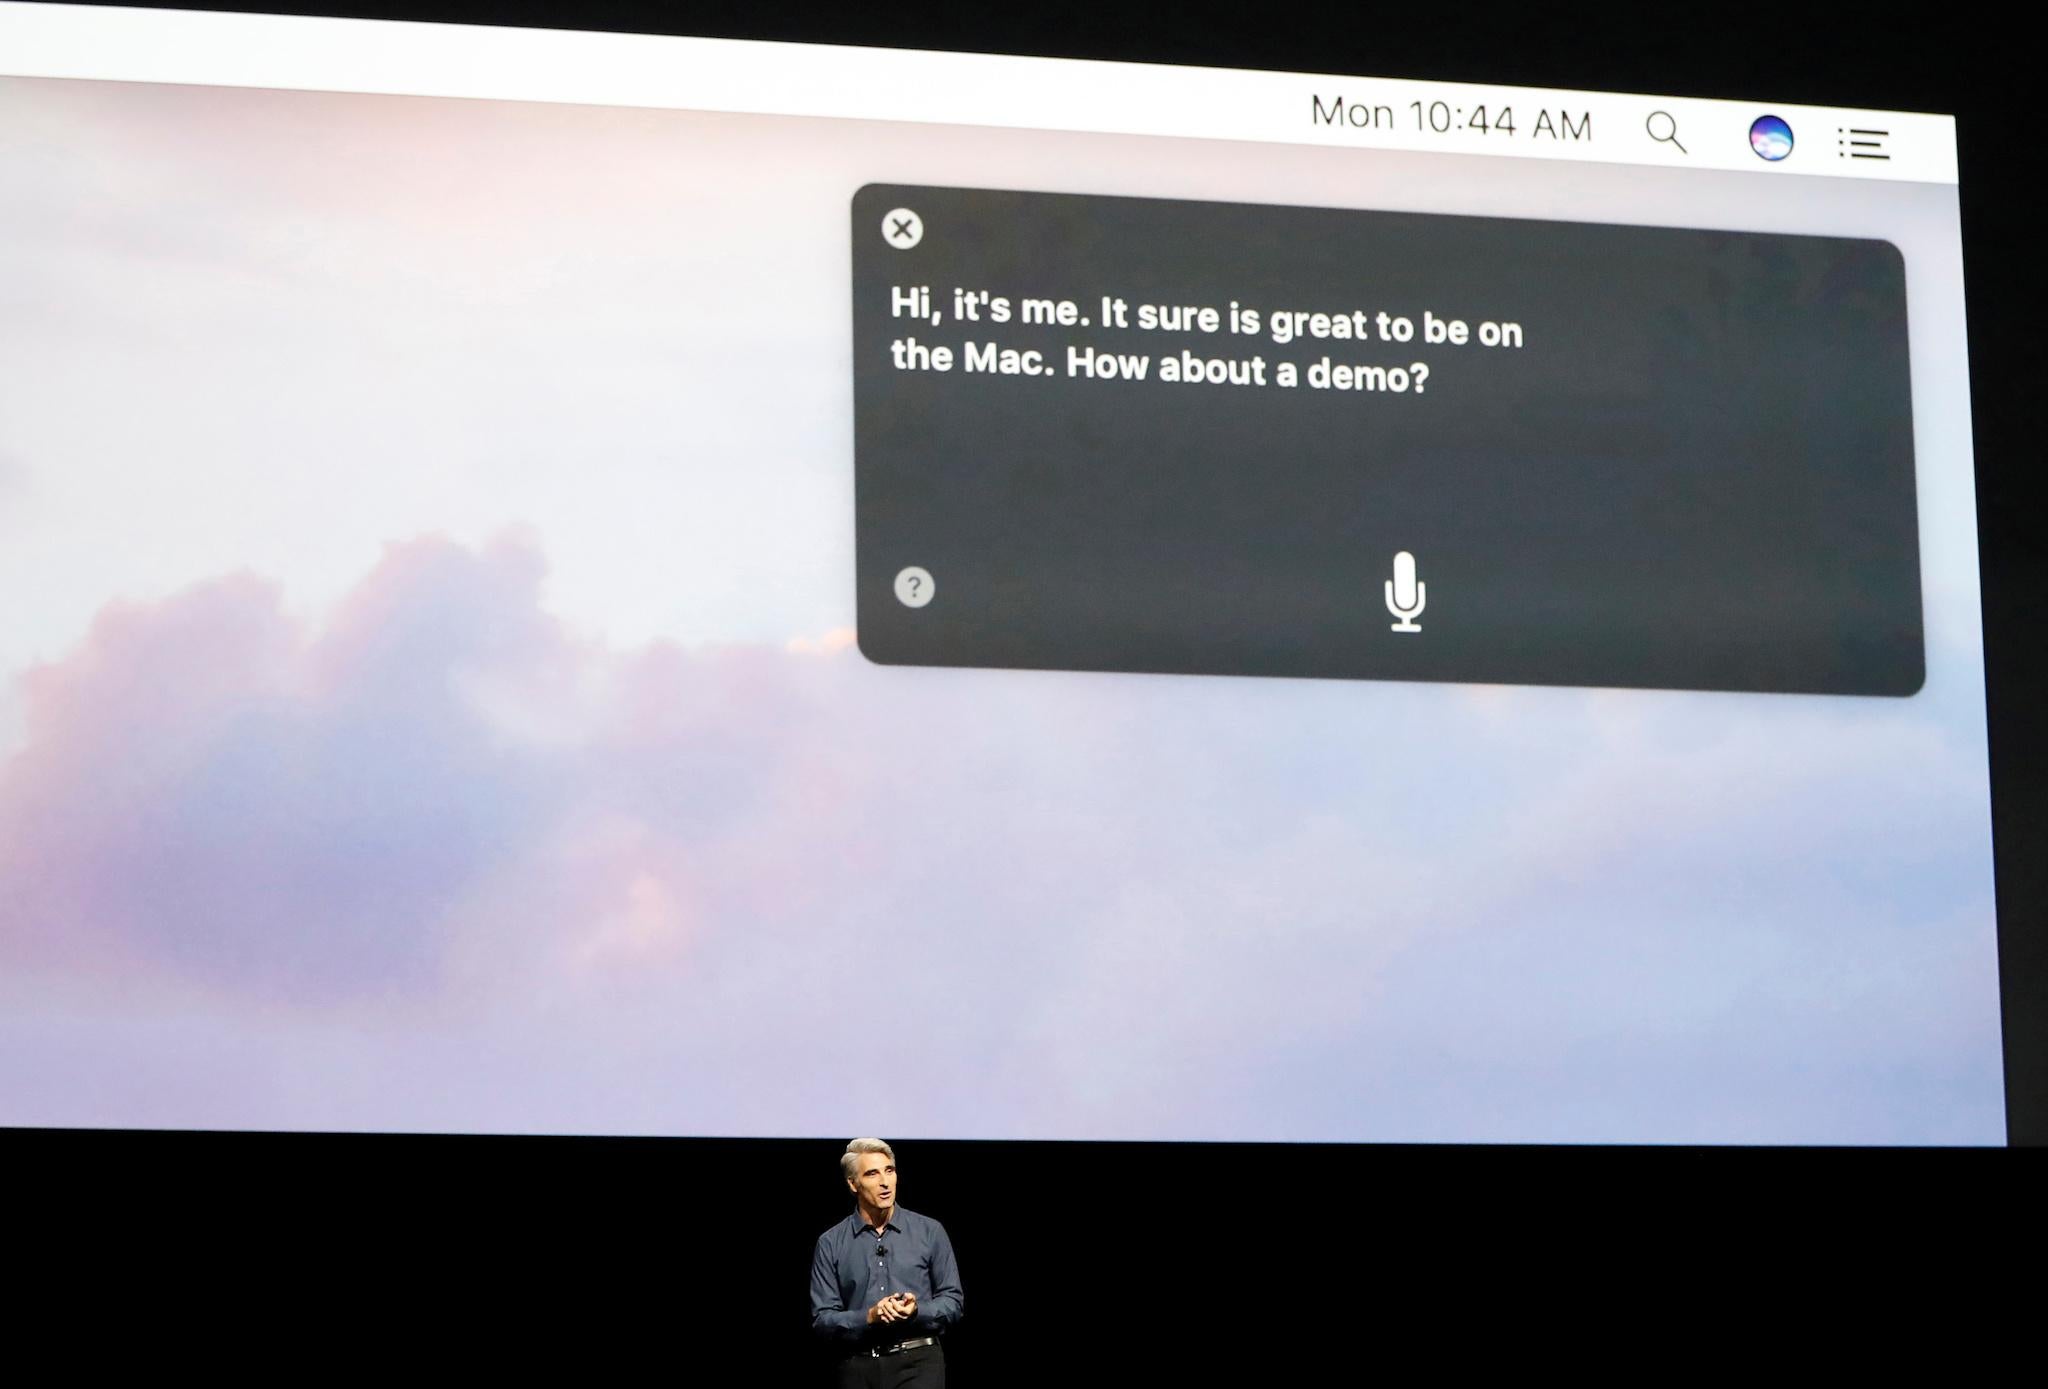 Craig Federighi, Senior Vice President of Software Engineering for Apple Inc, discusses the Siri desktop assistant for Mac OS Sierra at the company's World Wide Developers Conference in San Francisco, California